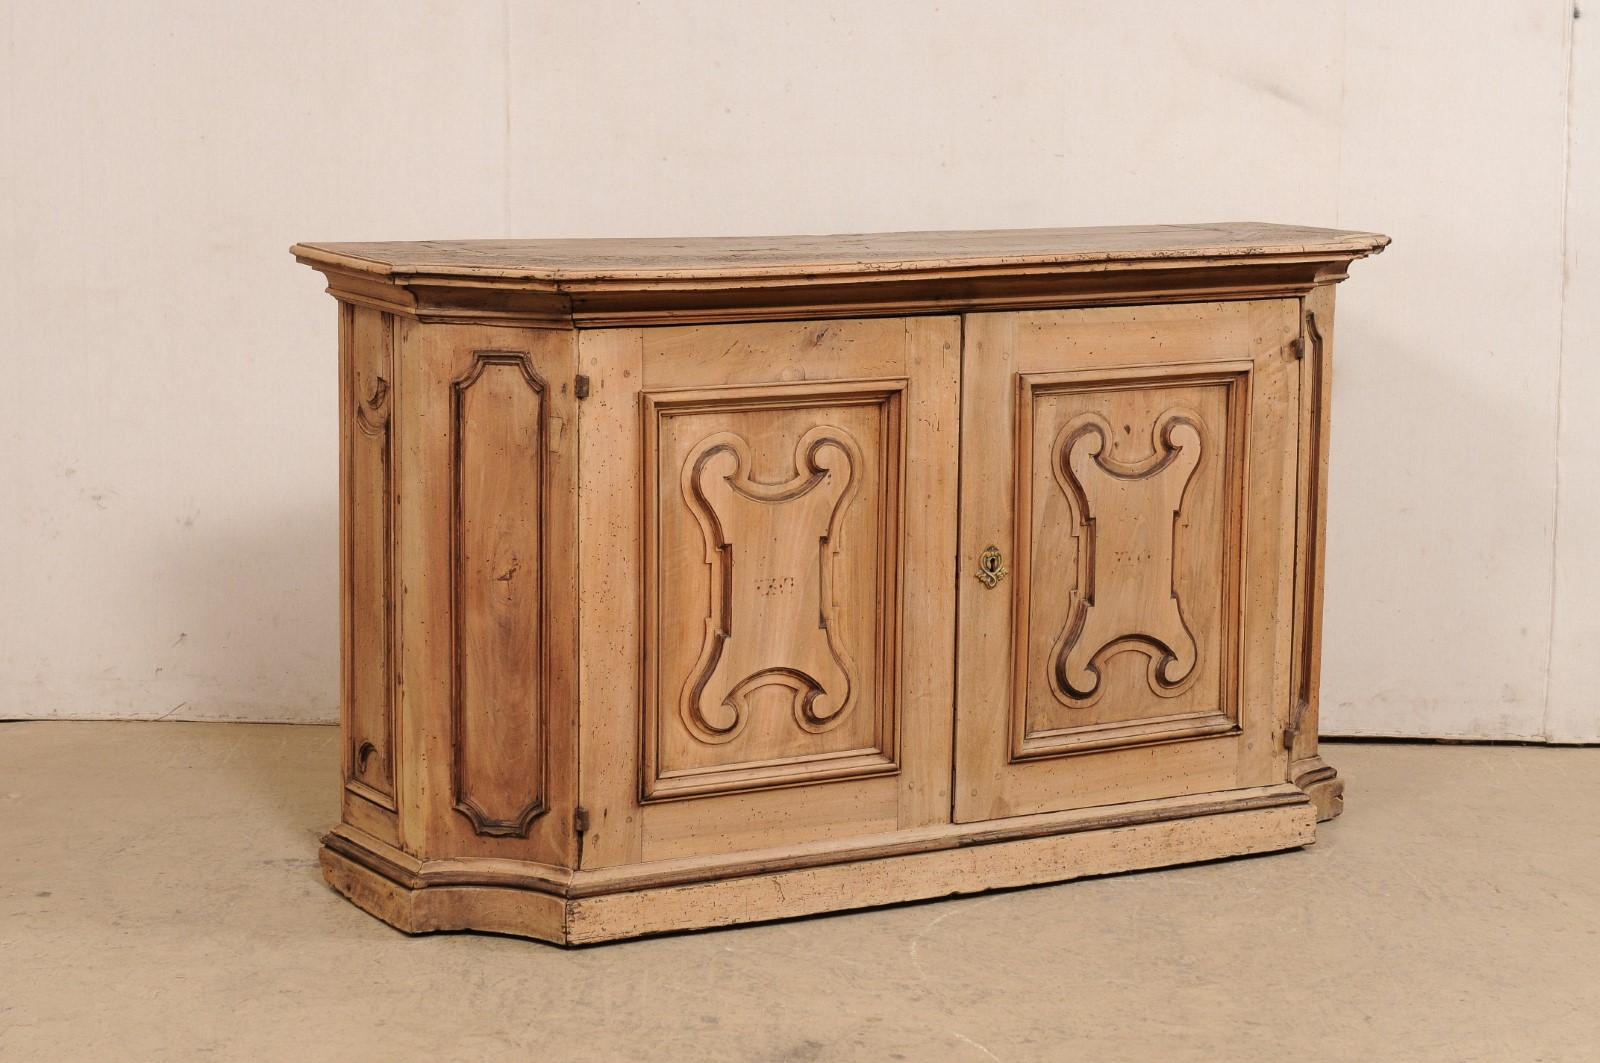 An Italian carved-wood console chest from the 18th century. This antique cabinet from Italy has a breakfront style design, with convex side posts flanking the pair of doors housed at center, and presented upon a platform style base. Decoratively